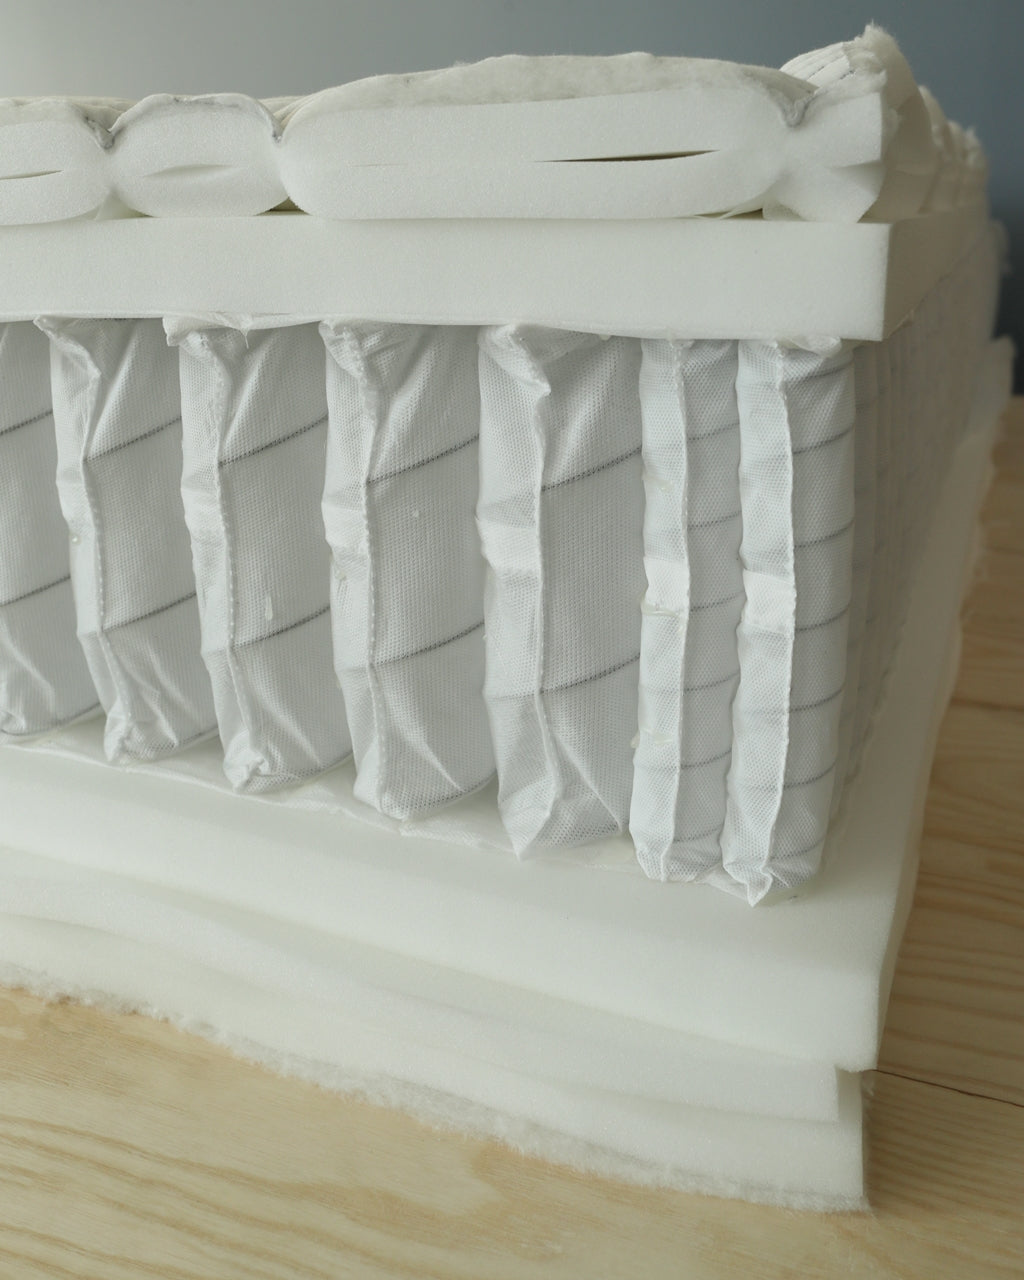 Cross section of DLX mattress highlighting quality materials and manufacturing transparency